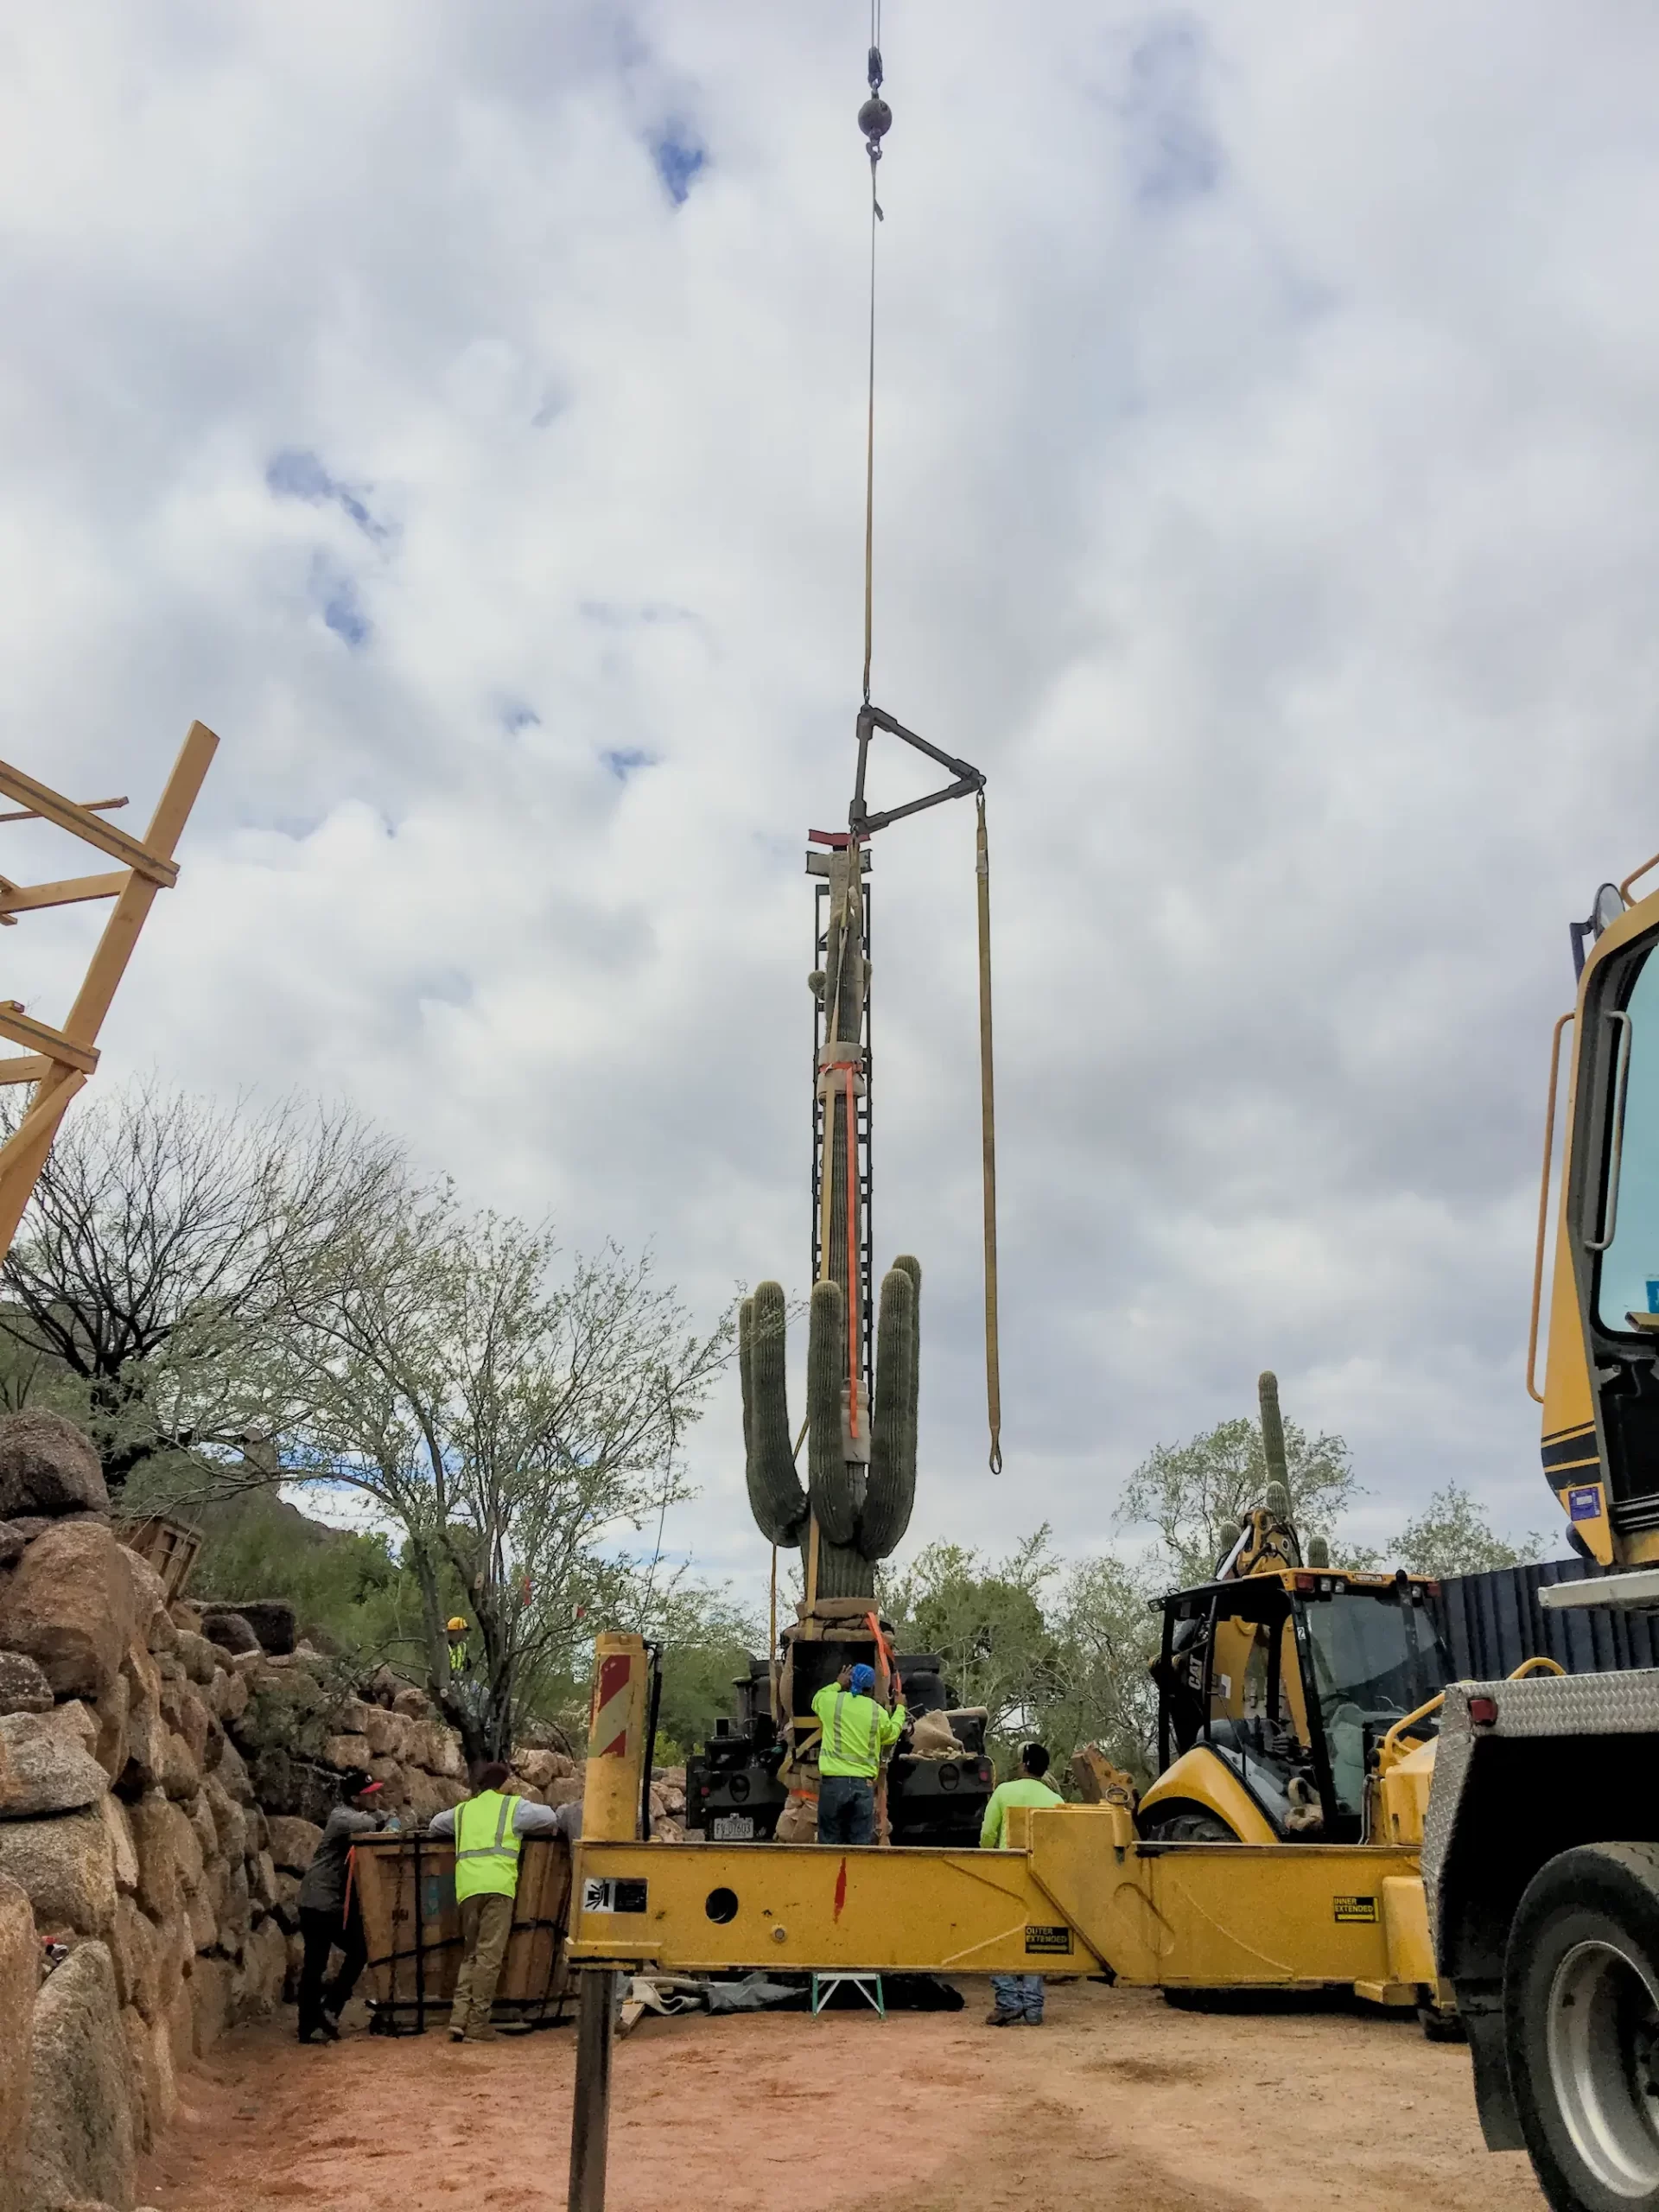 A delicate operation to lift a large saguaro cactus into place, with a team working in harmony.